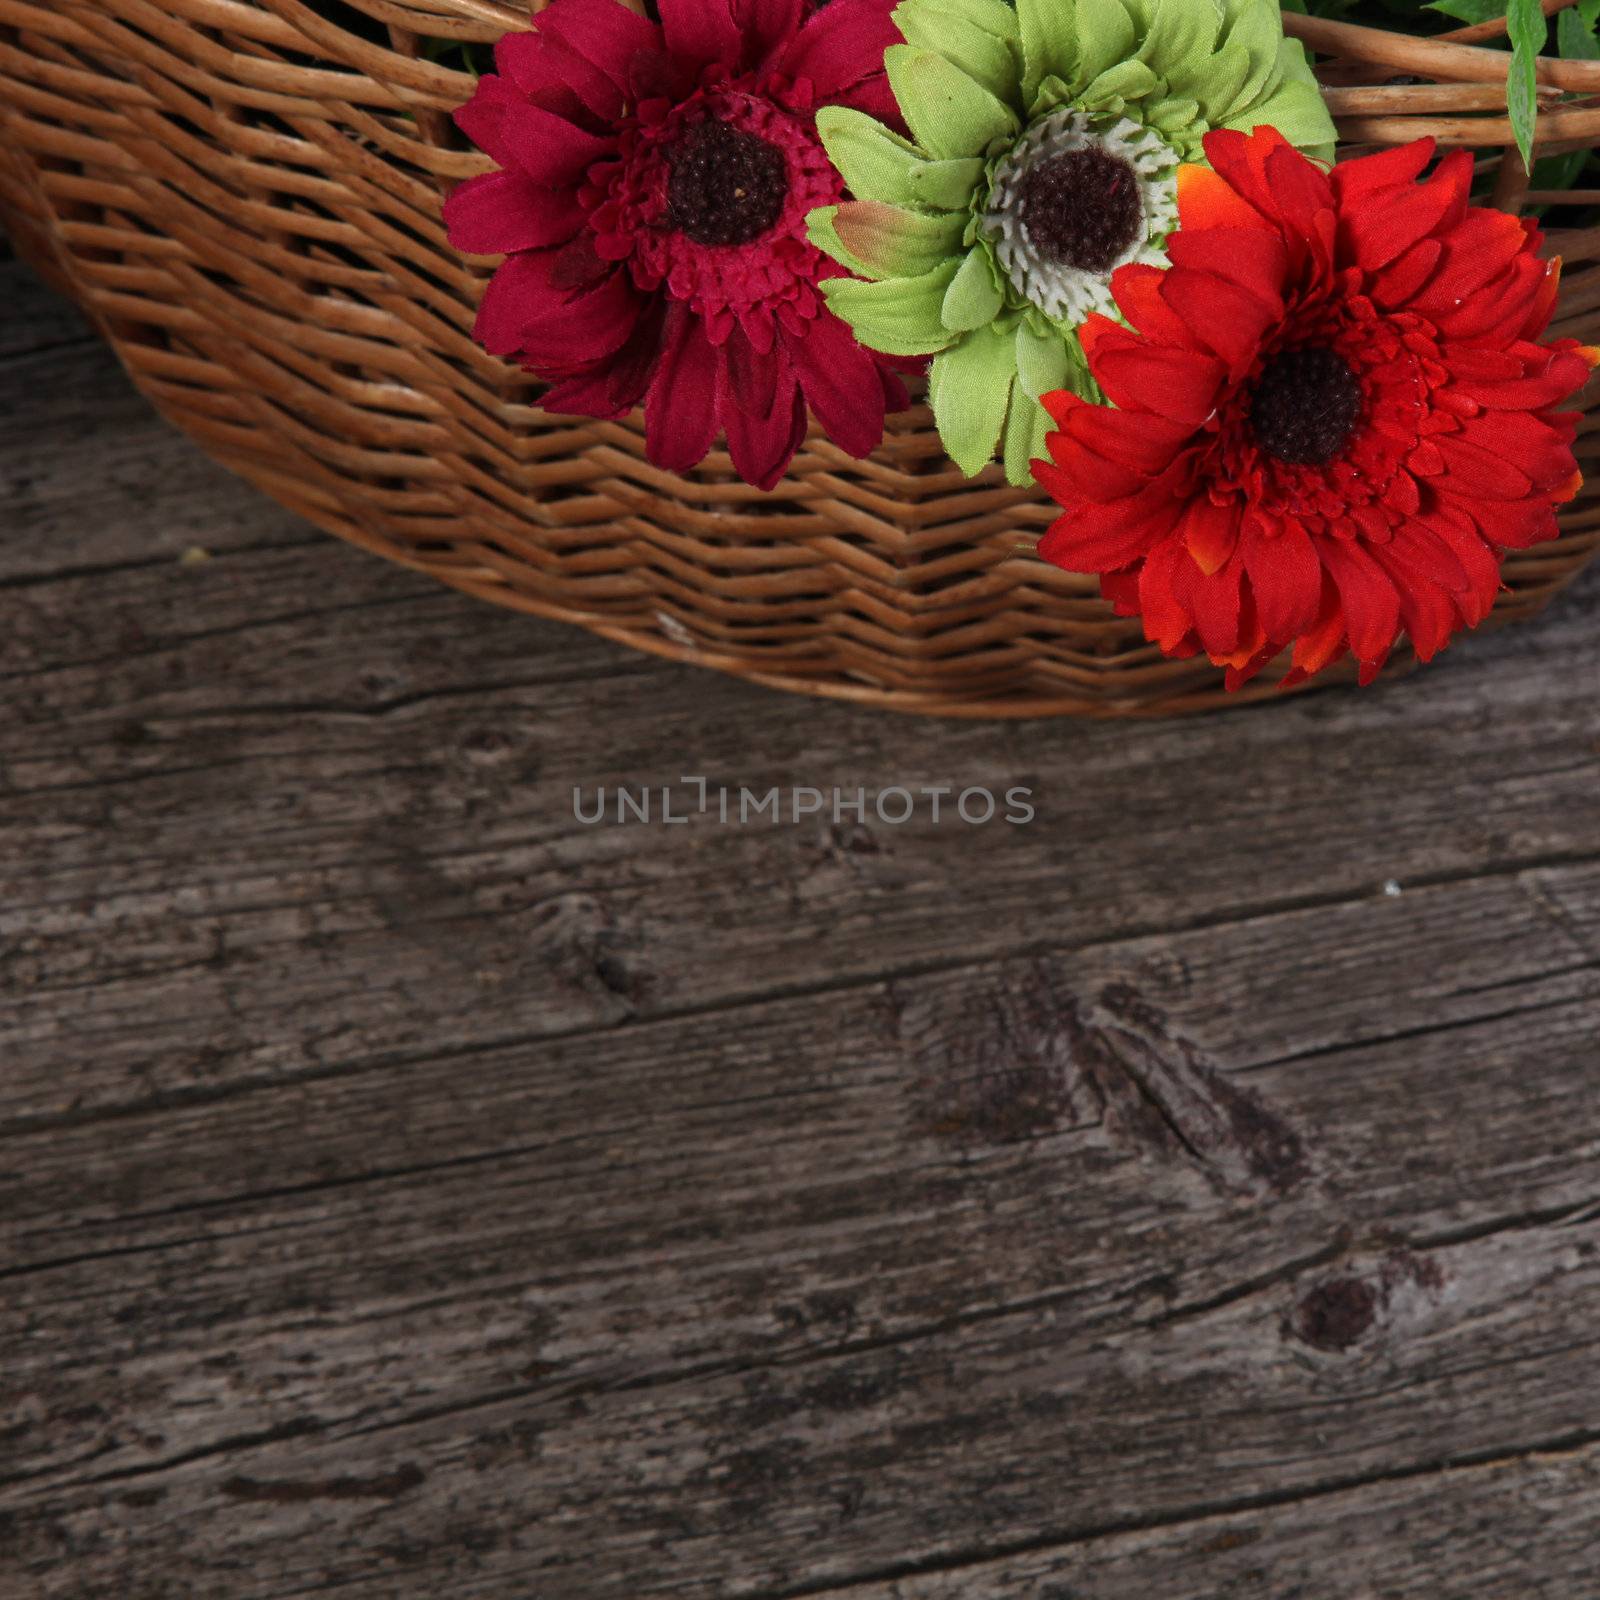 A basket of colorful flowers lying on a wooden table